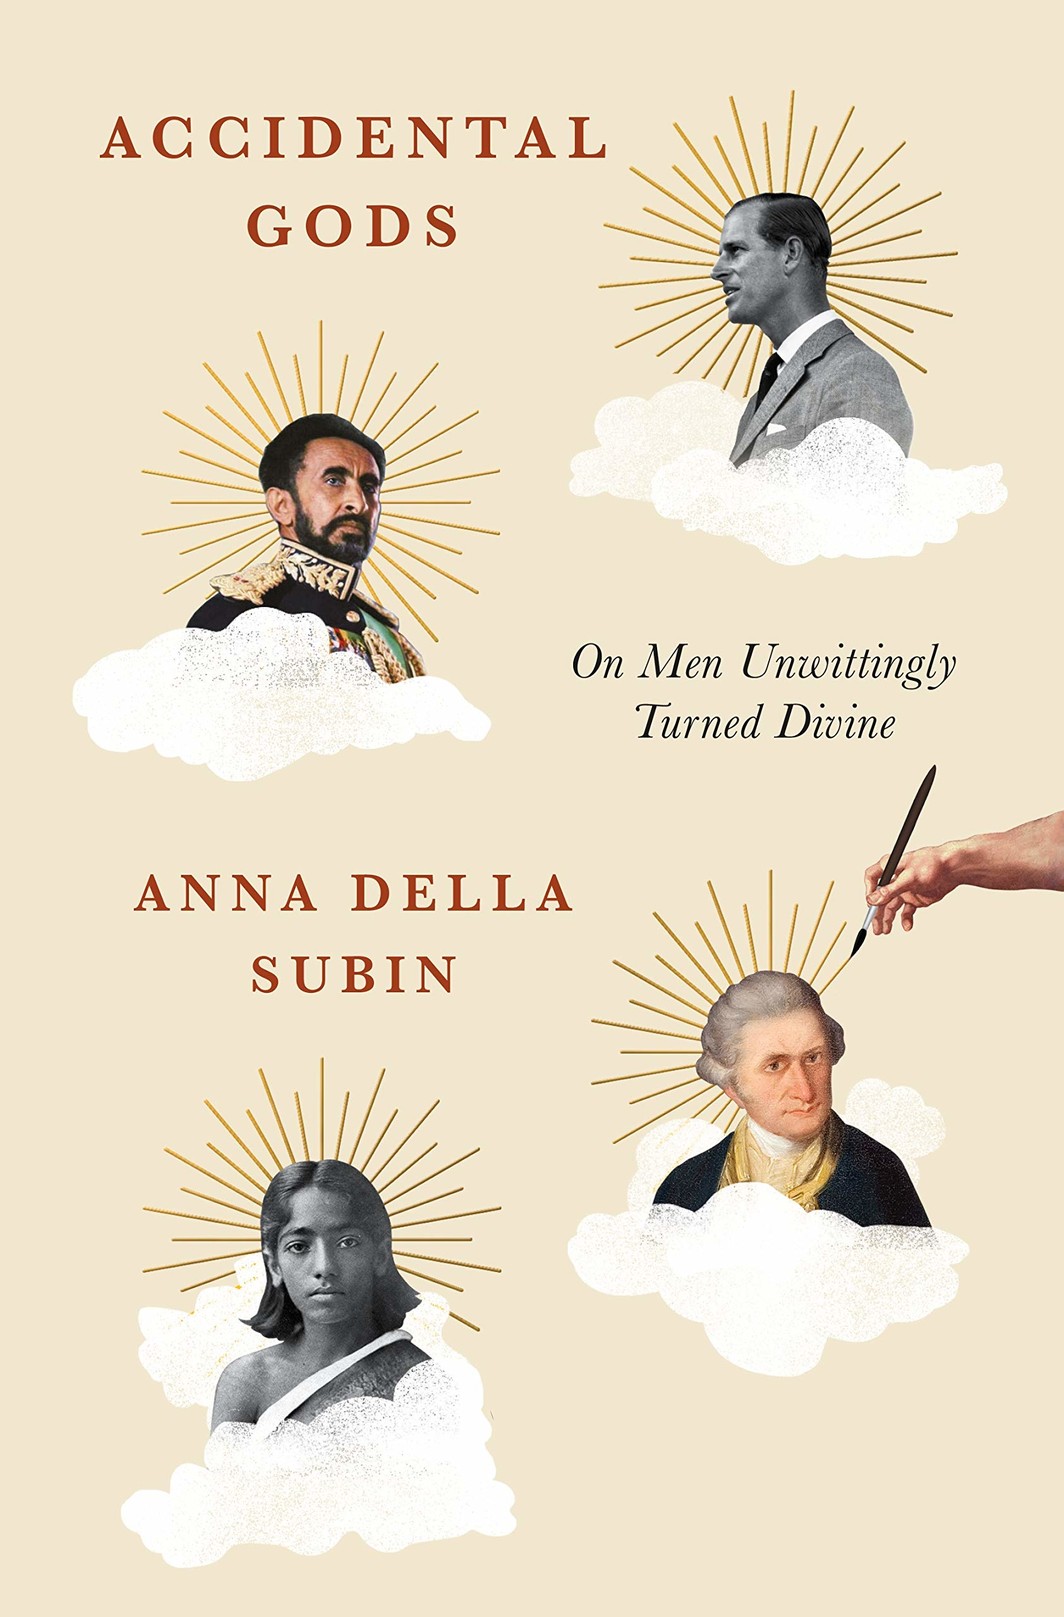 The cover of Accidental Gods: On Men Unwittingly Turned Divine